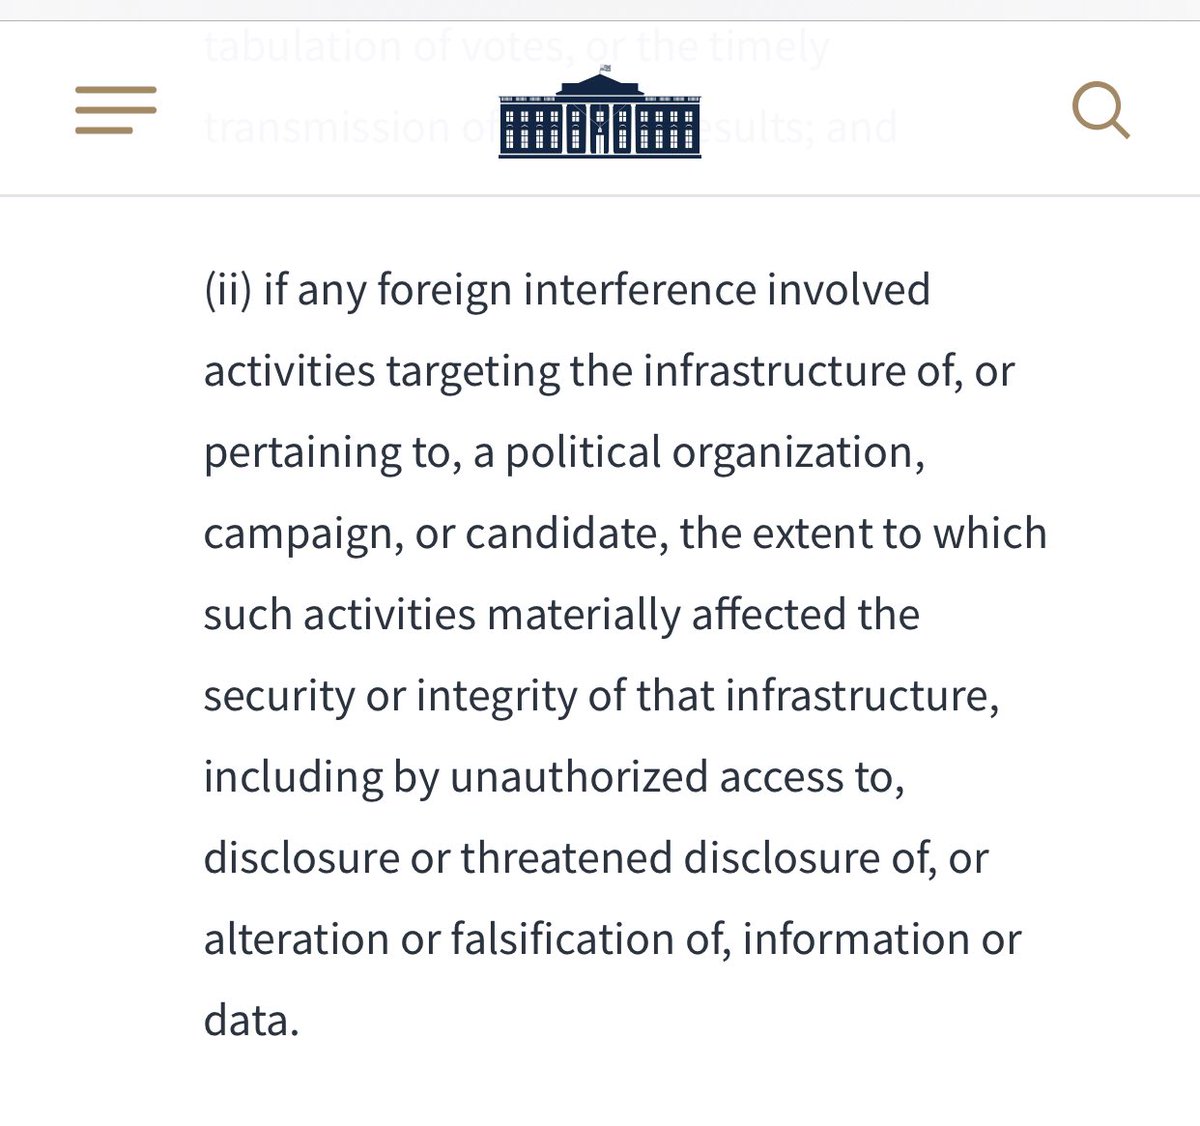 Evidence supports enactment of EO 13848—Executive Order on Imposing Certain Sanctions in the Event of Foreign Interference in a United States ElectionFOREIGN POLICYIssued on: September 12, 2018 https://www.whitehouse.gov/presidential-actions/executive-order-imposing-certain-sanctions-event-foreign-interference-united-states-election/